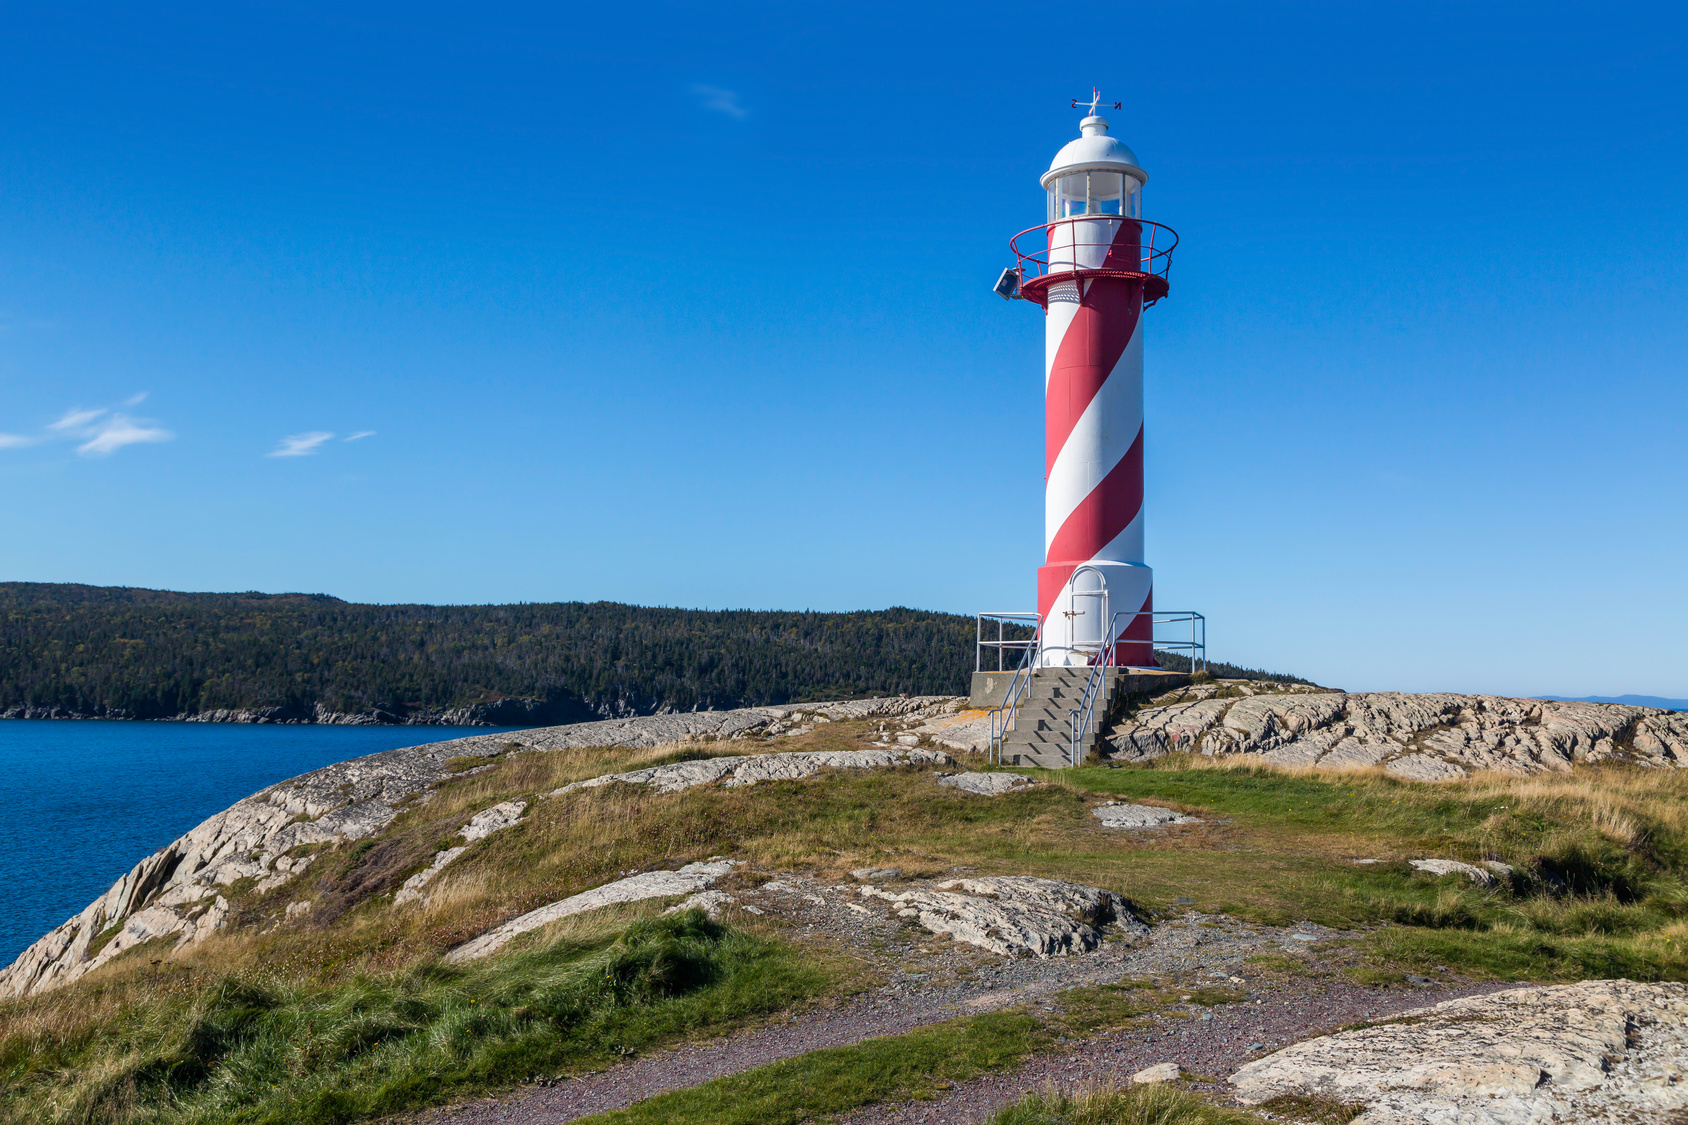 Candy cane colored lighthouse in Heart's Delight, Newfoundland, Canada.